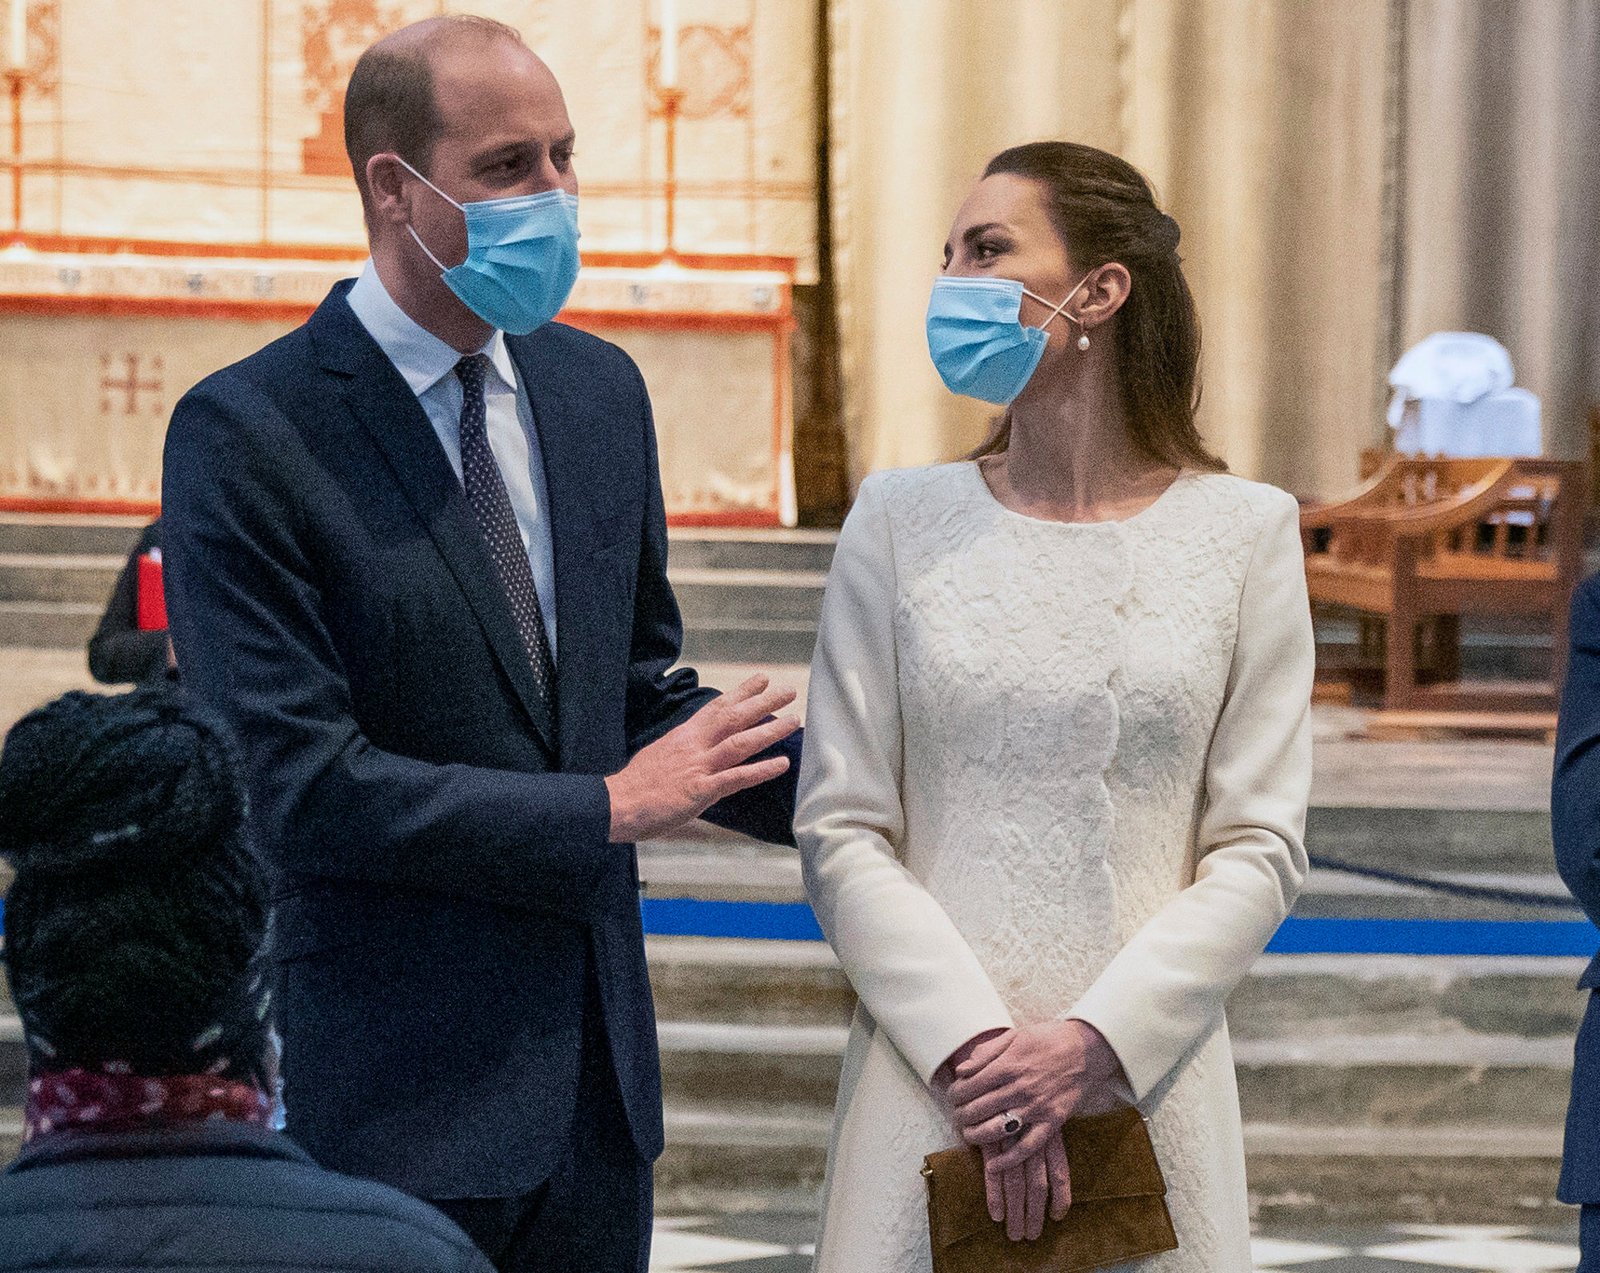 Catherine, Duchess of Cambridge in self-isolation - She had contact with an infected person